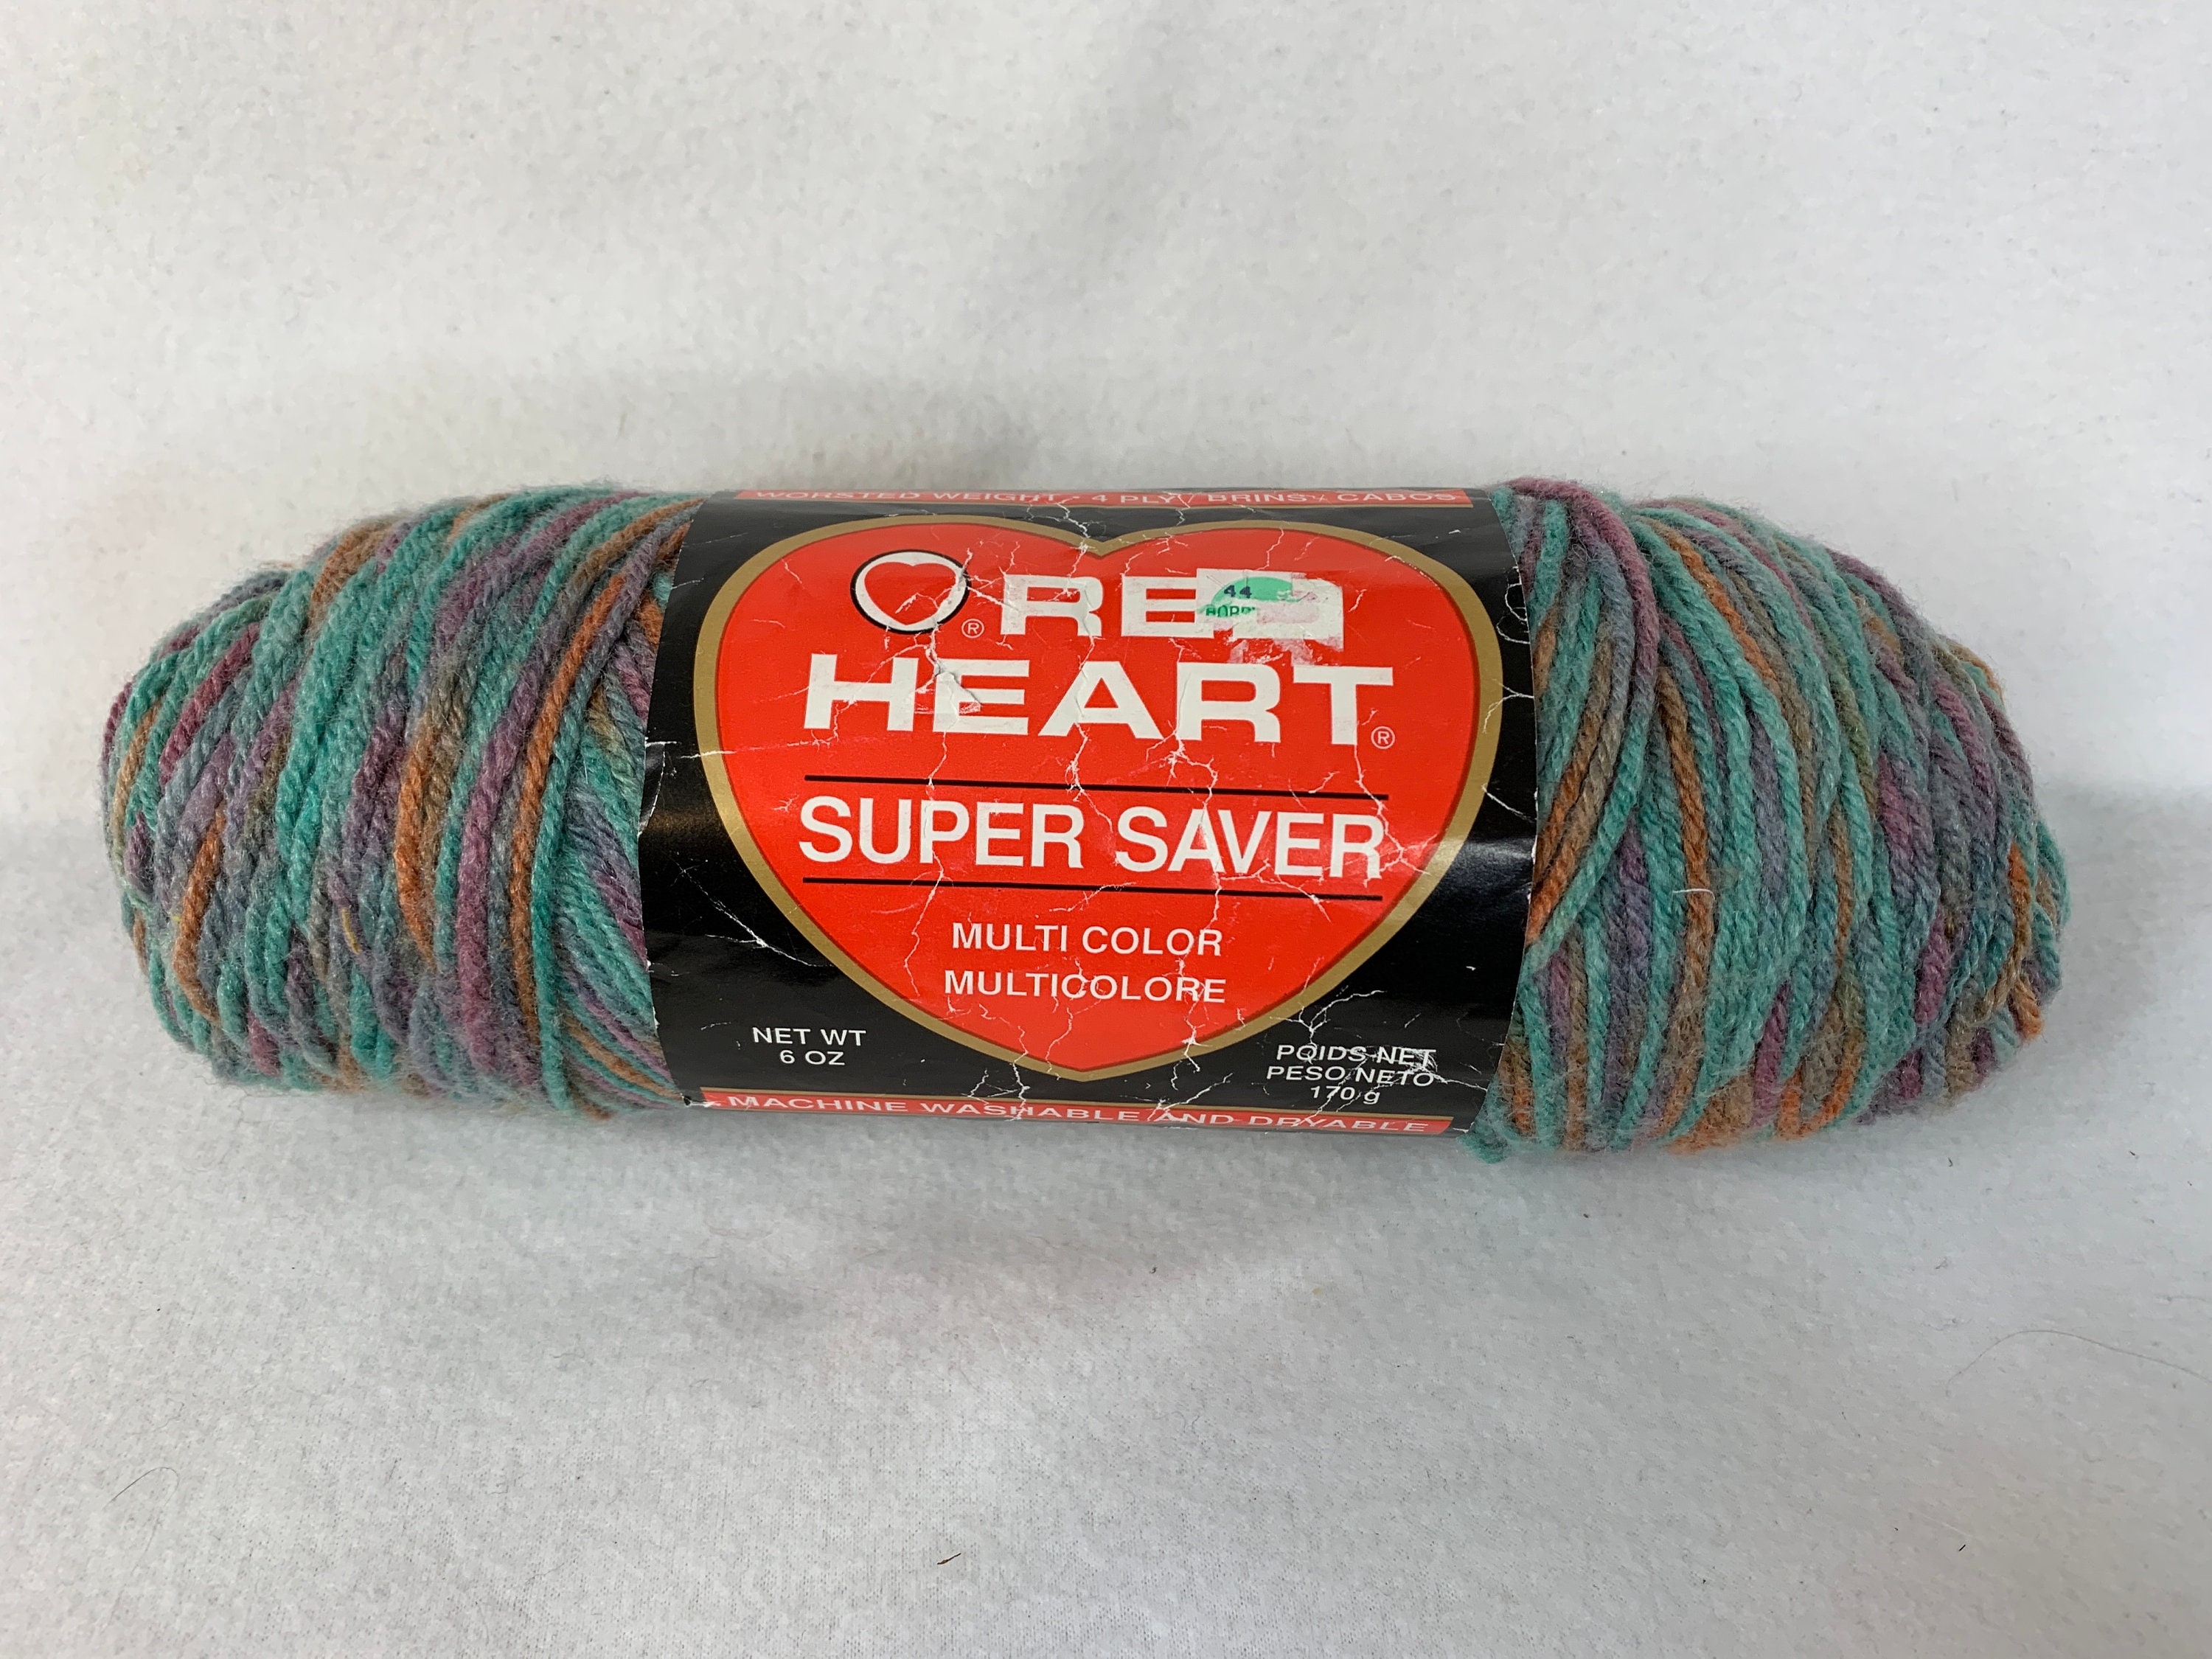 Red Heart Super Saver Big Giveaway - Win 10 Skeins on Moogly